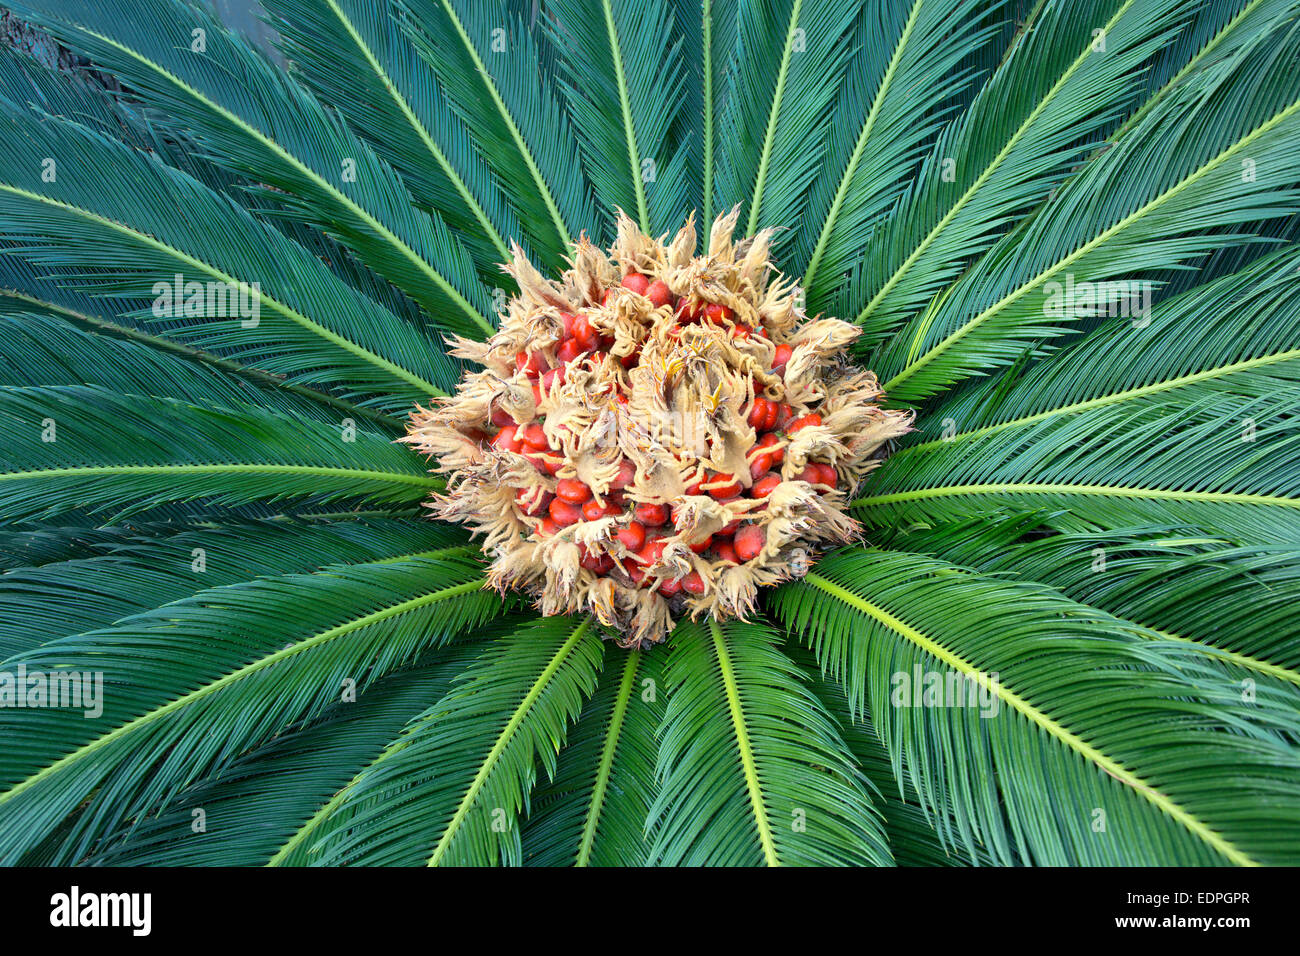 Sago palm, producing a felt mass in the center of the leaf mass. Stock Photo